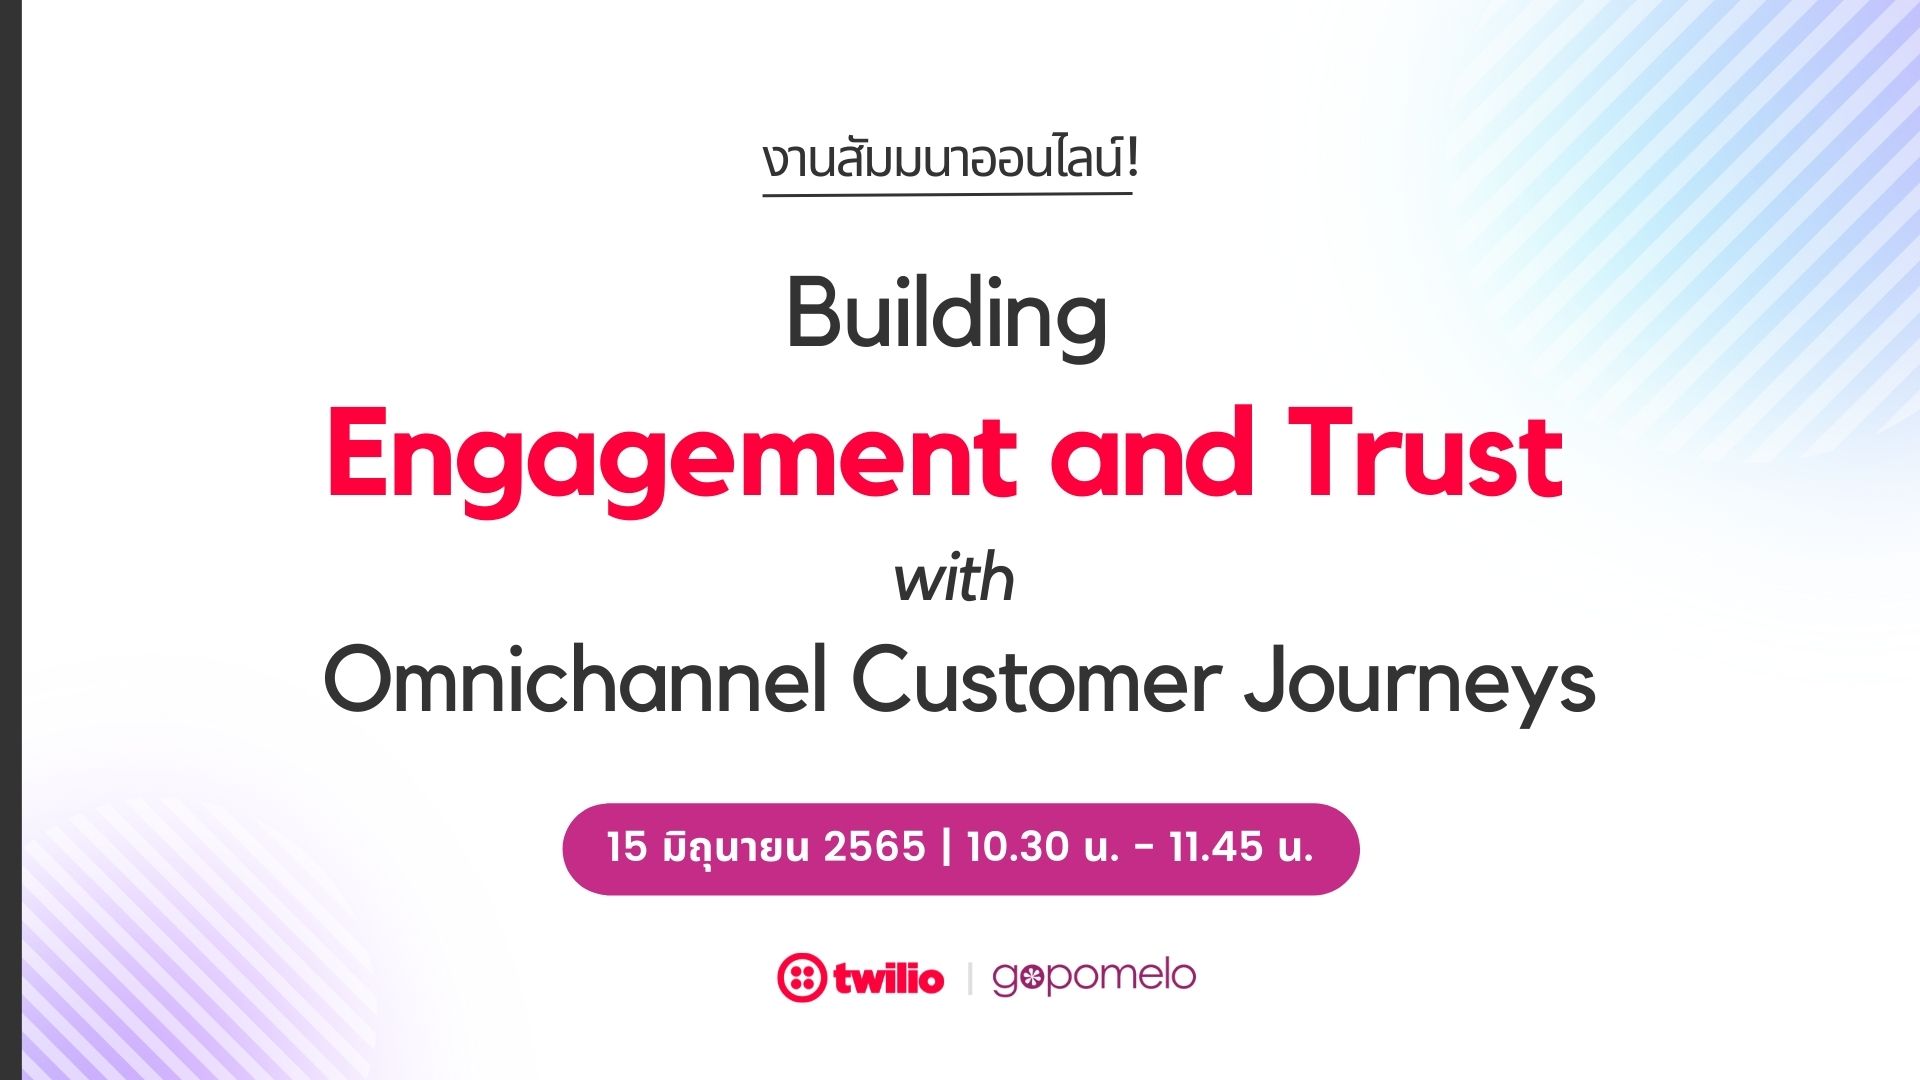 Building Engagement and Trust with Omnichannel Customer Journeys